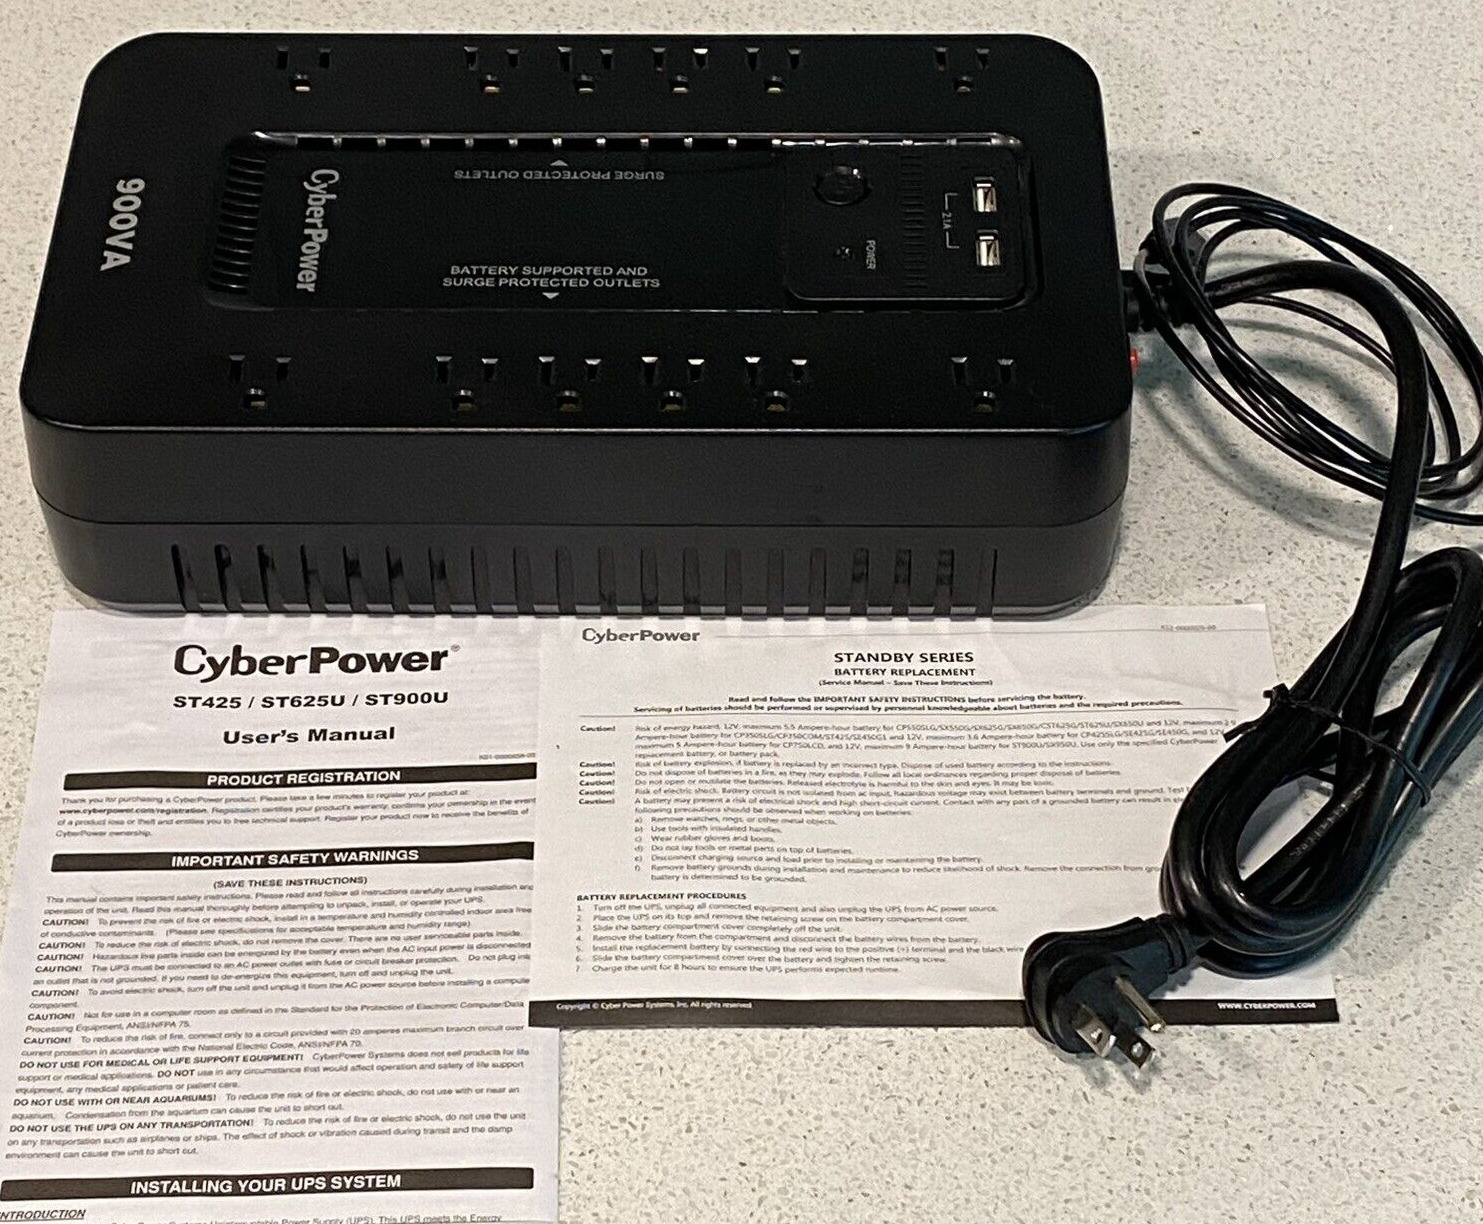 CyberPower ST900U Surge Protection/Battery Backup Standby UPS 900VA -- TESTED